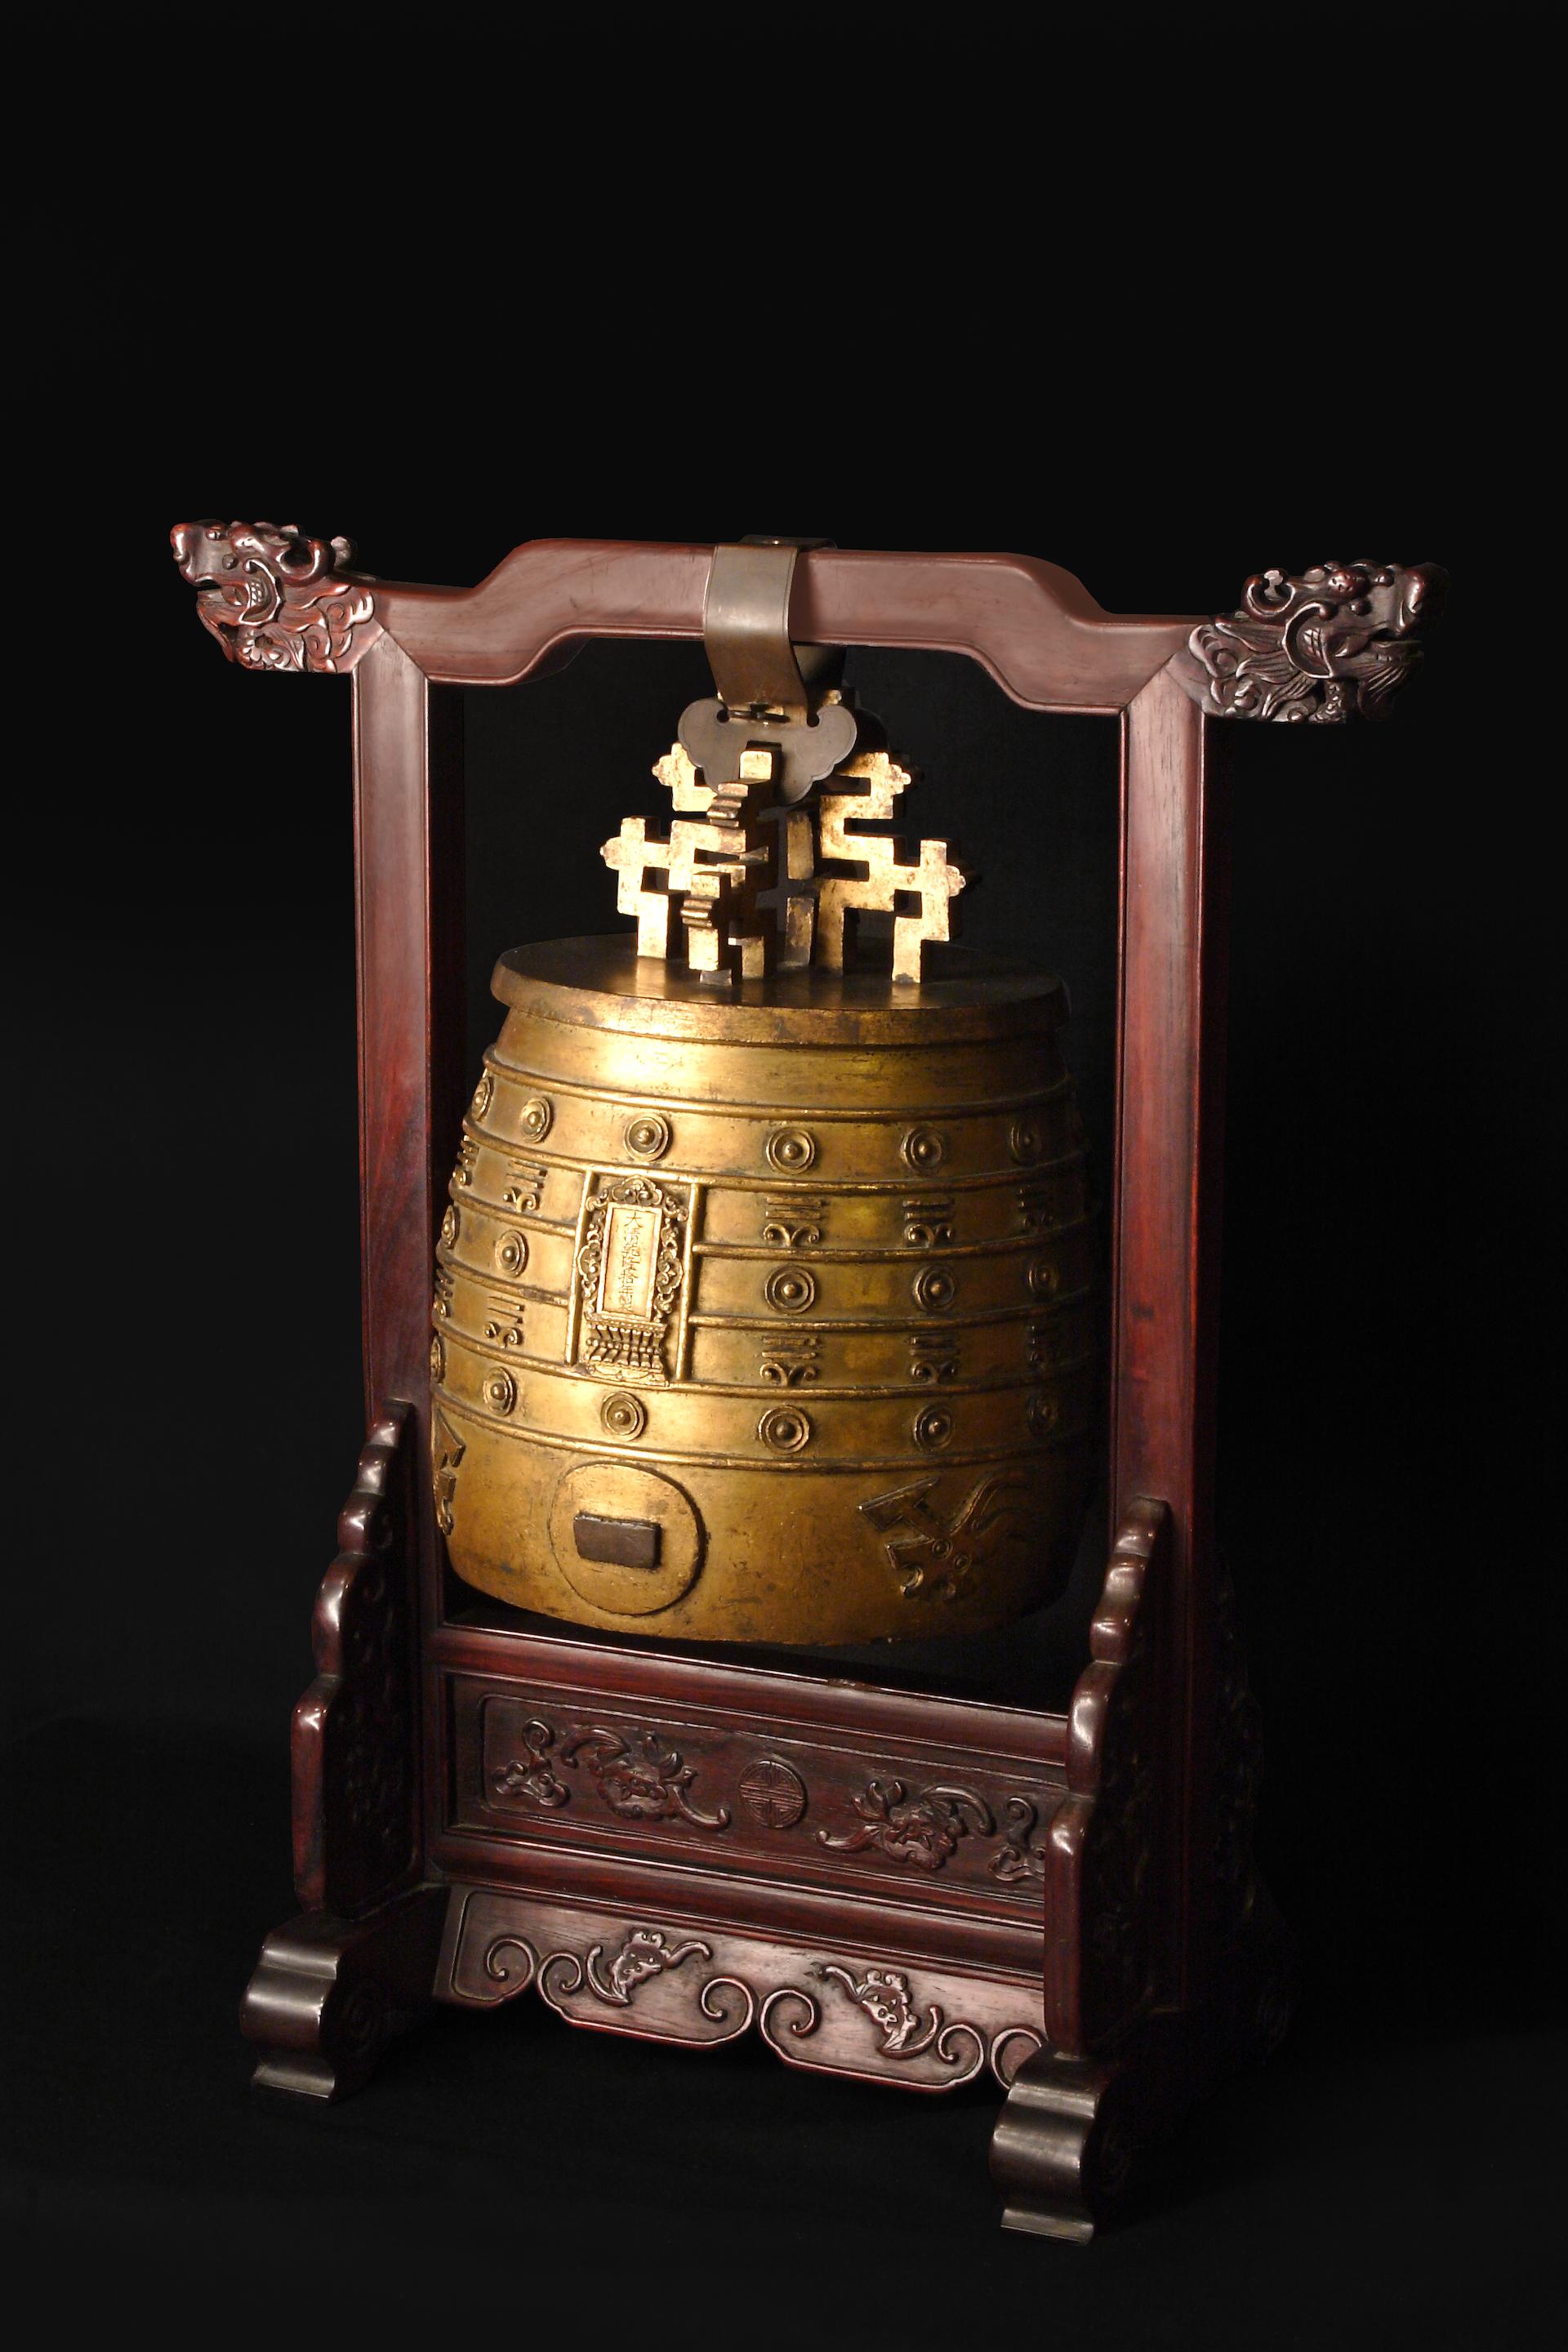 Southeast Asian Bronze Bell and two small bells for sale at auction on 18th  October